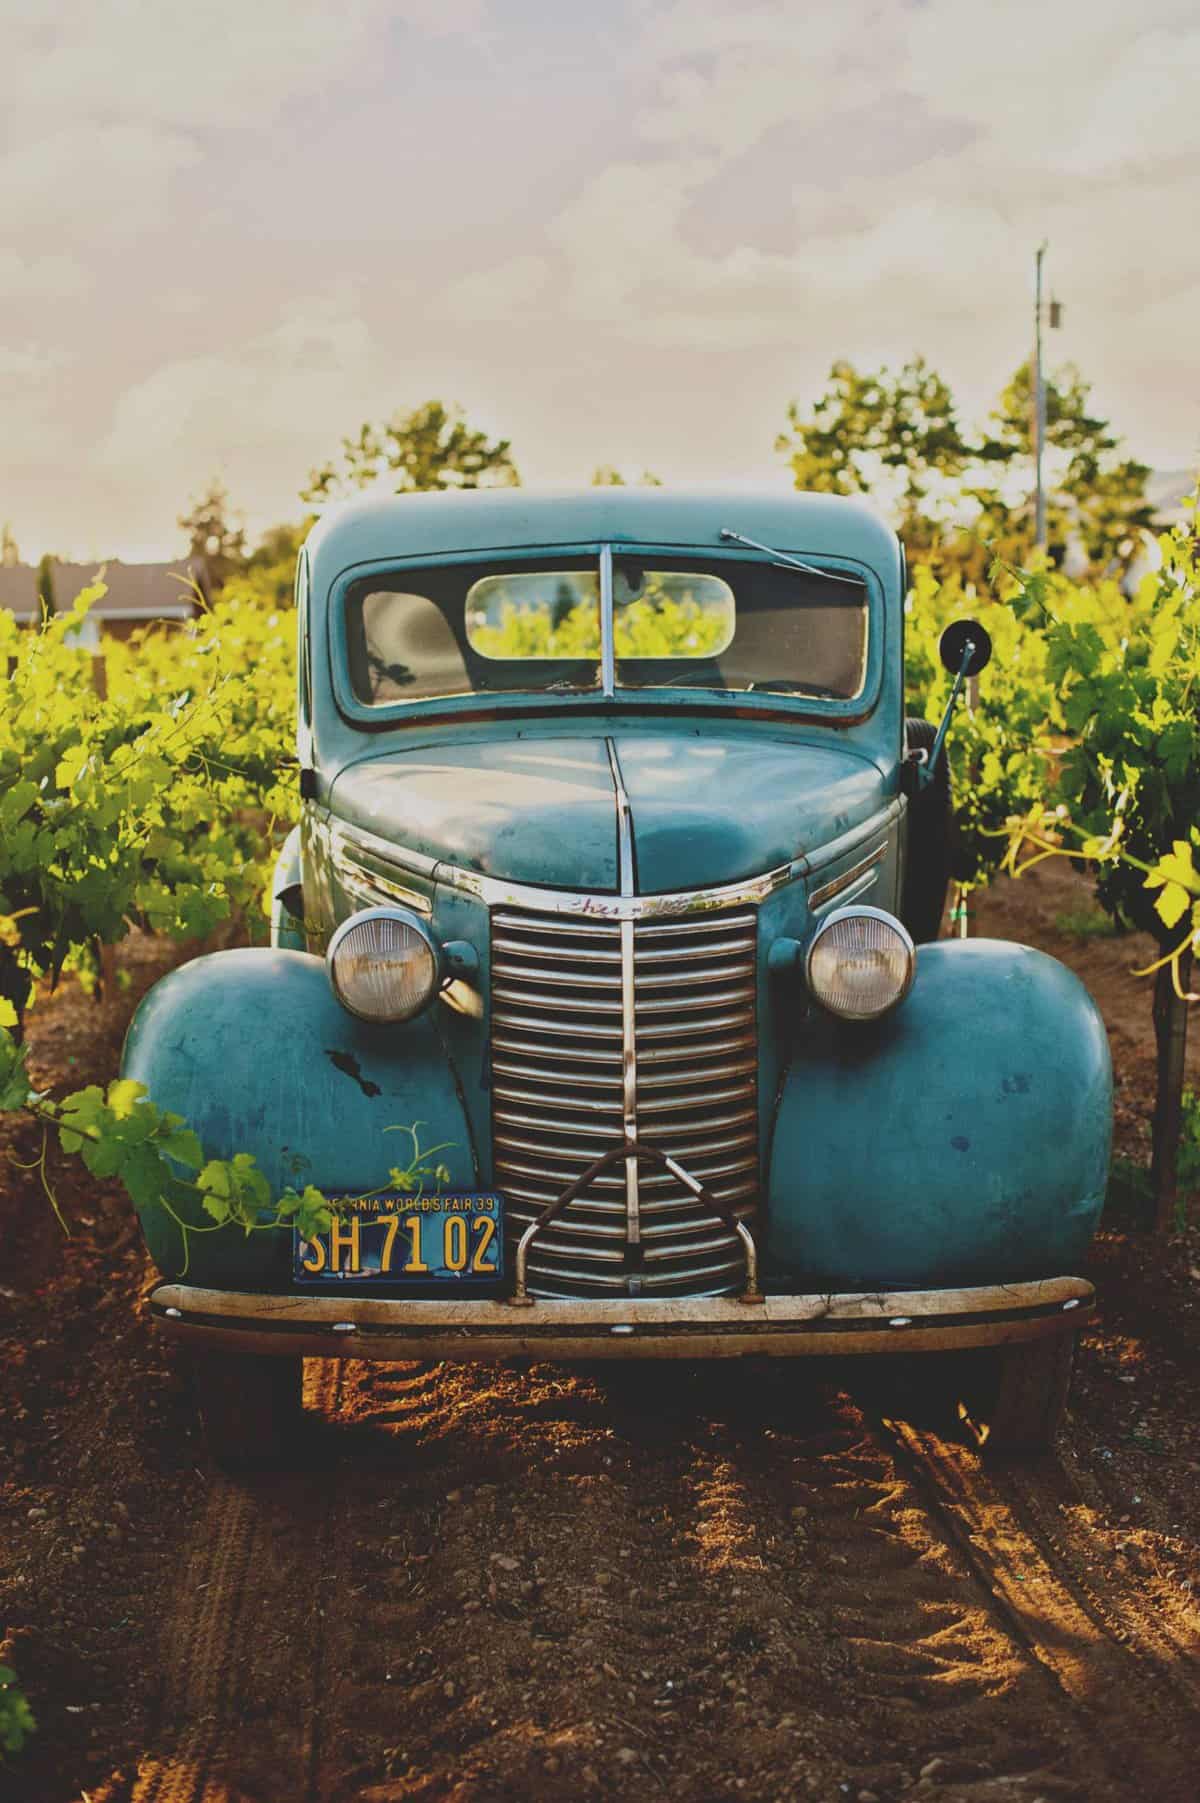 A vintage truck parked in a vineyard